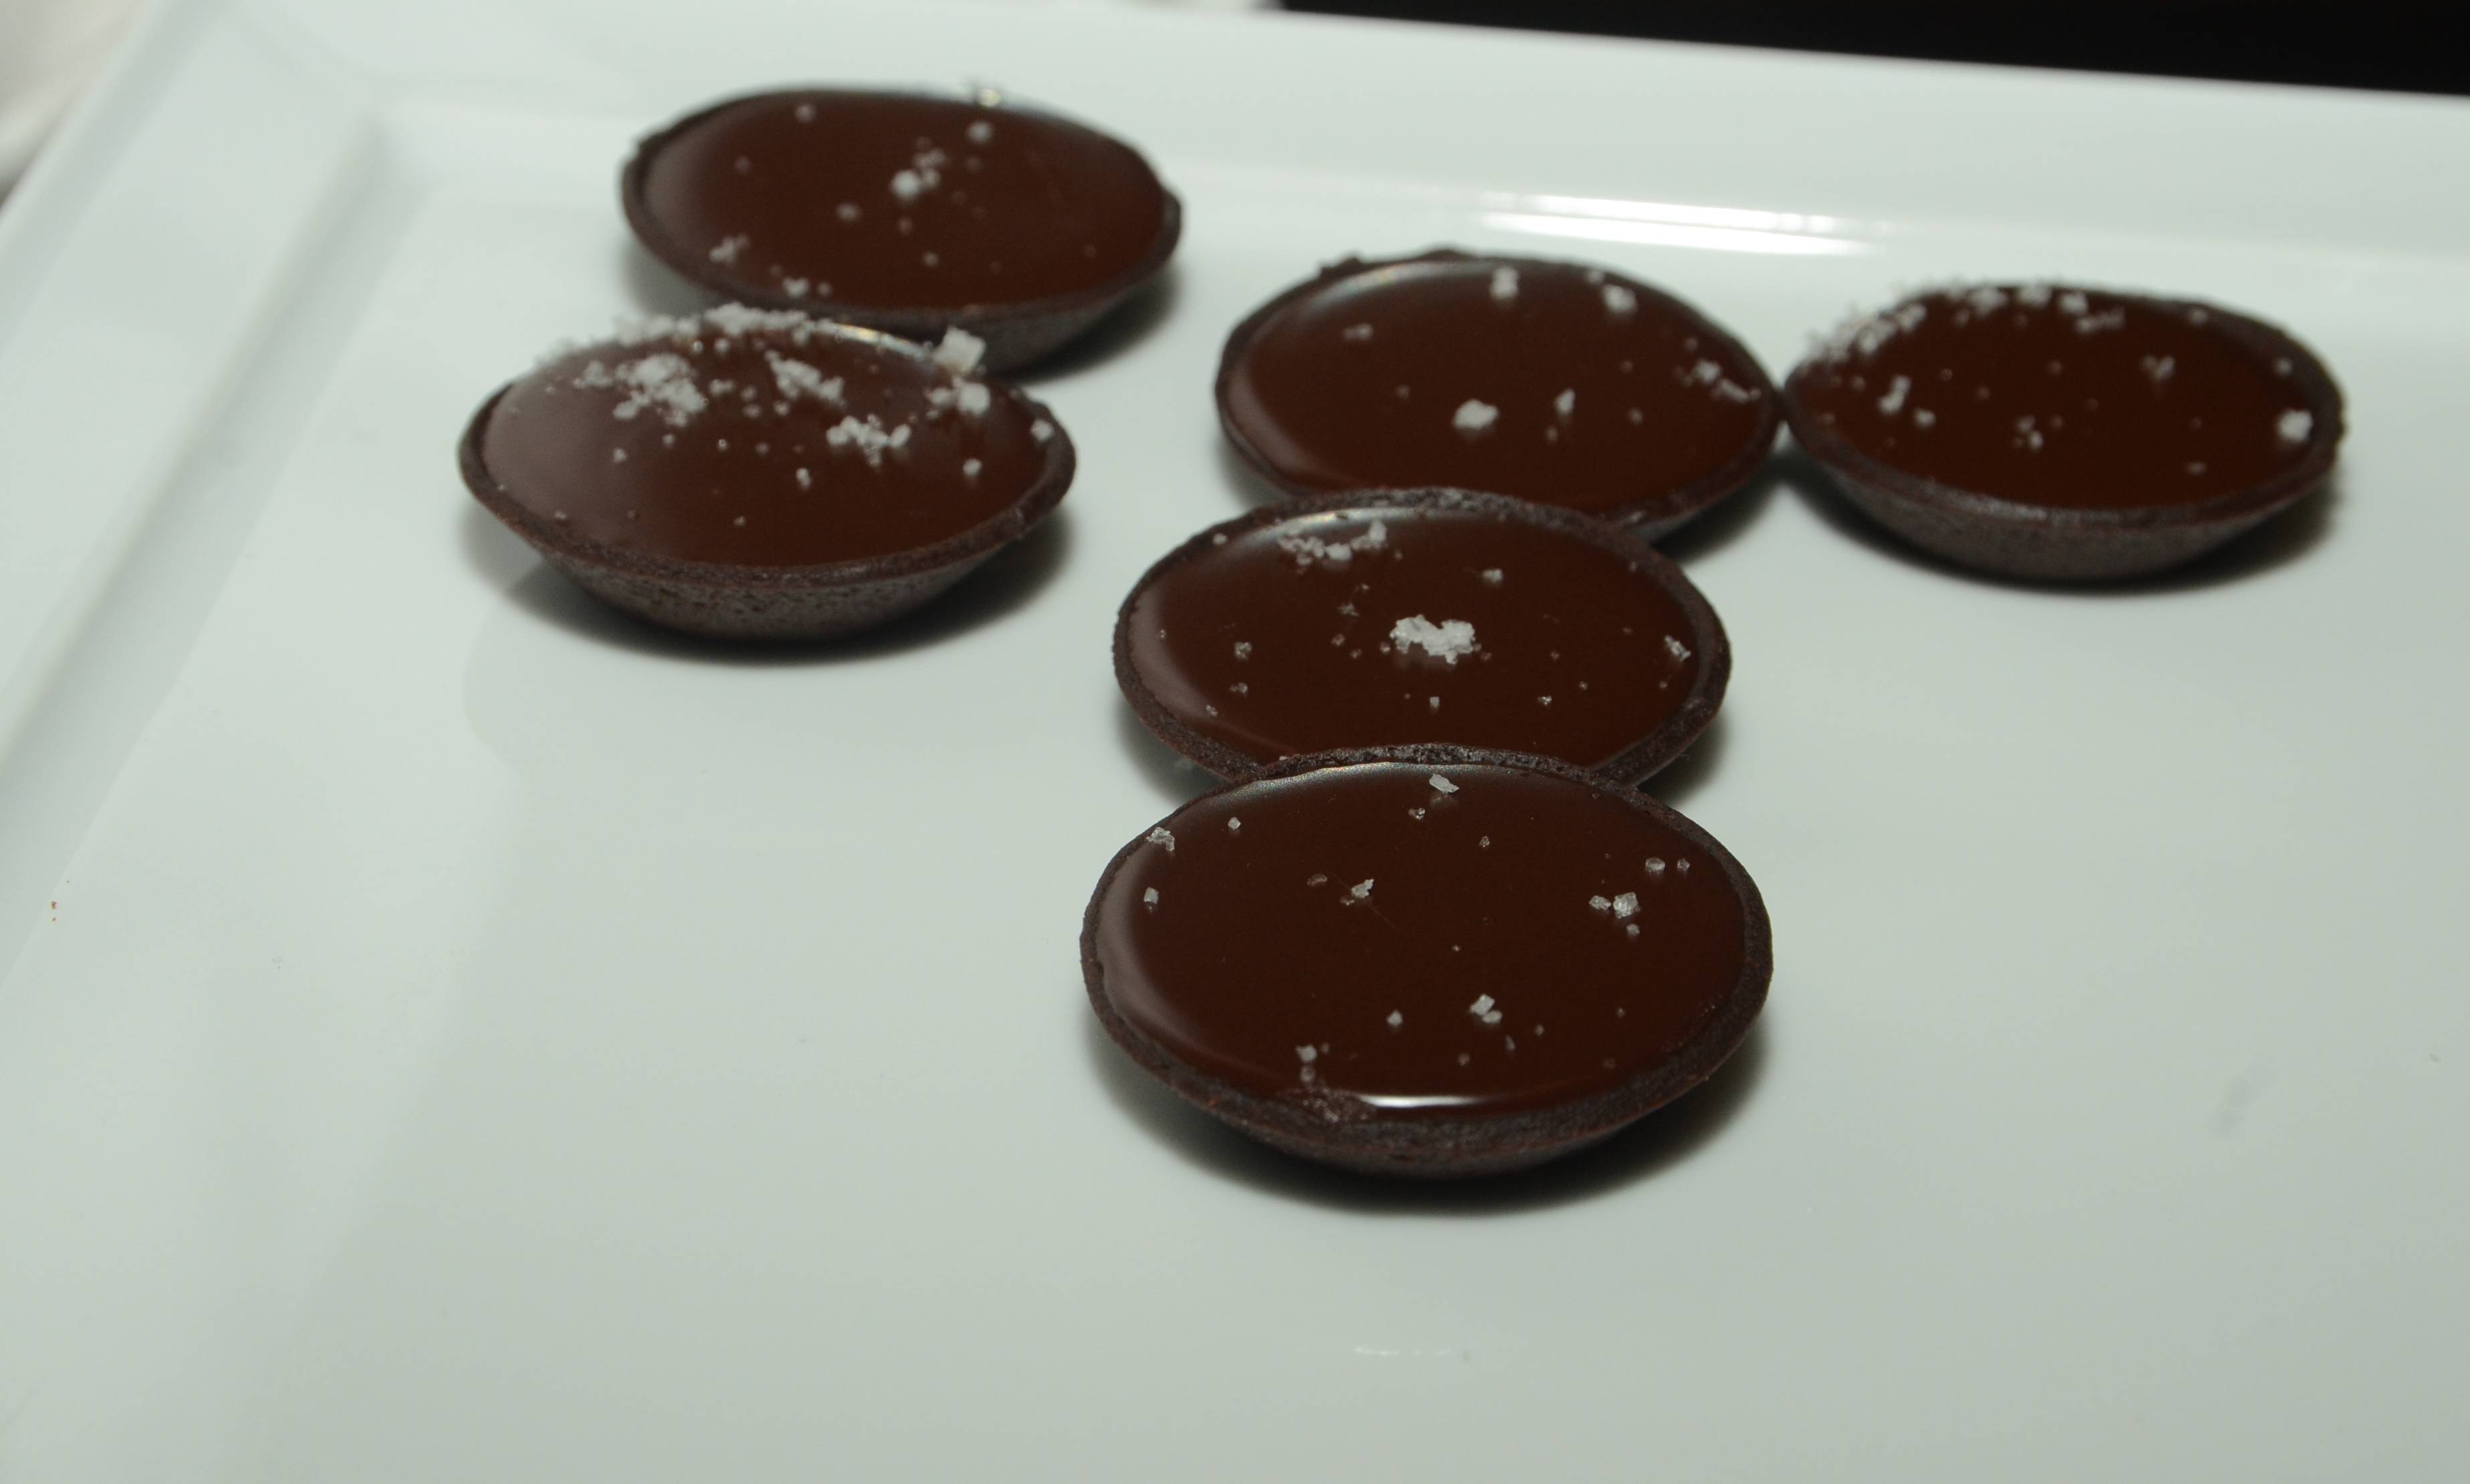 Chocolate Caramel Tarts Served at the U.S. Launch of Ultratravel Magazine